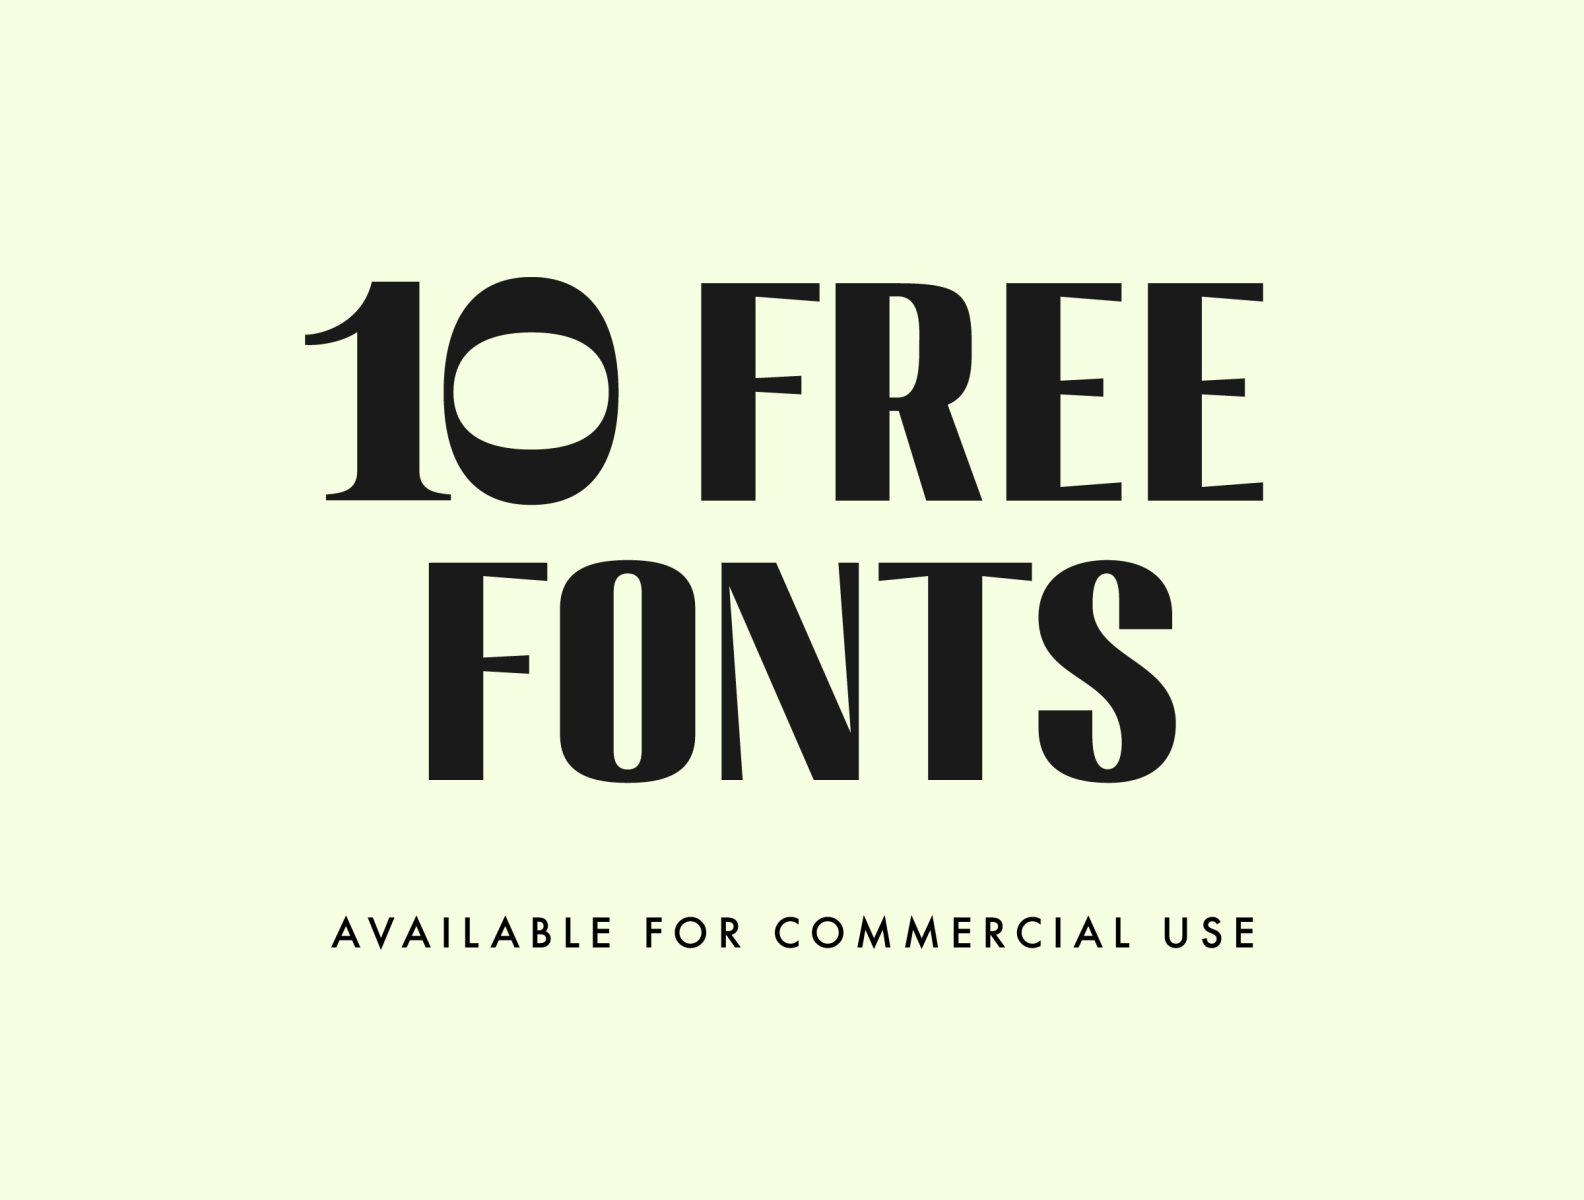 google fonts are free for commerical use